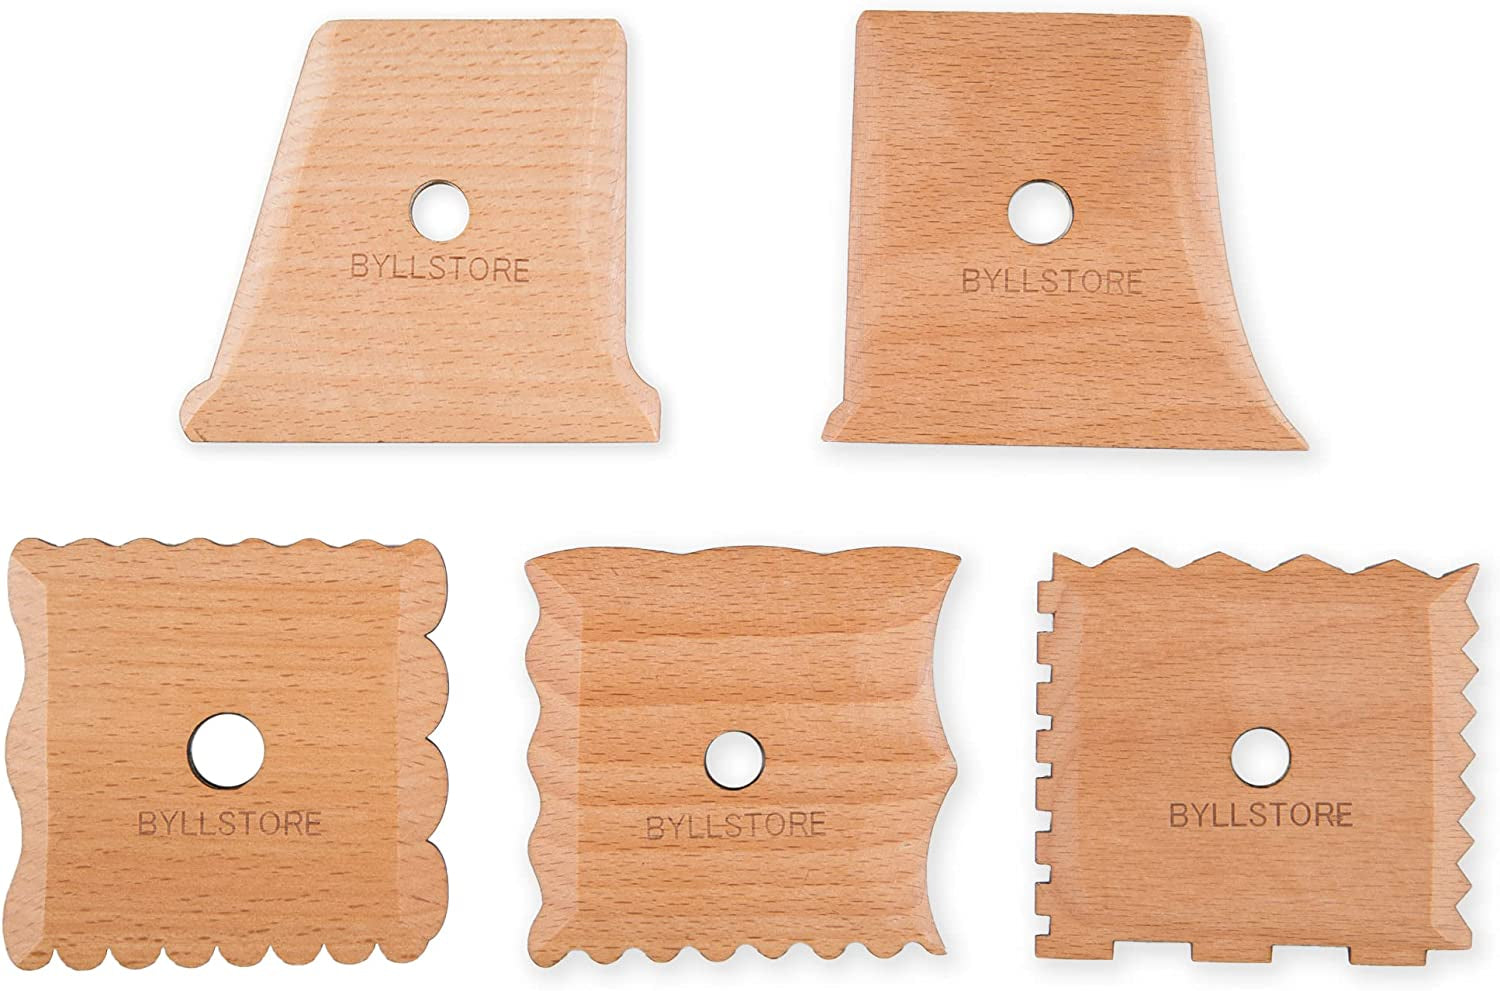 Byllstore Pottery Foot Shaper Tools & Texture Ribs | 2, 3 & 5-Packs | Texture Trimming for Clay & Ceramics | Beech Solid Wood